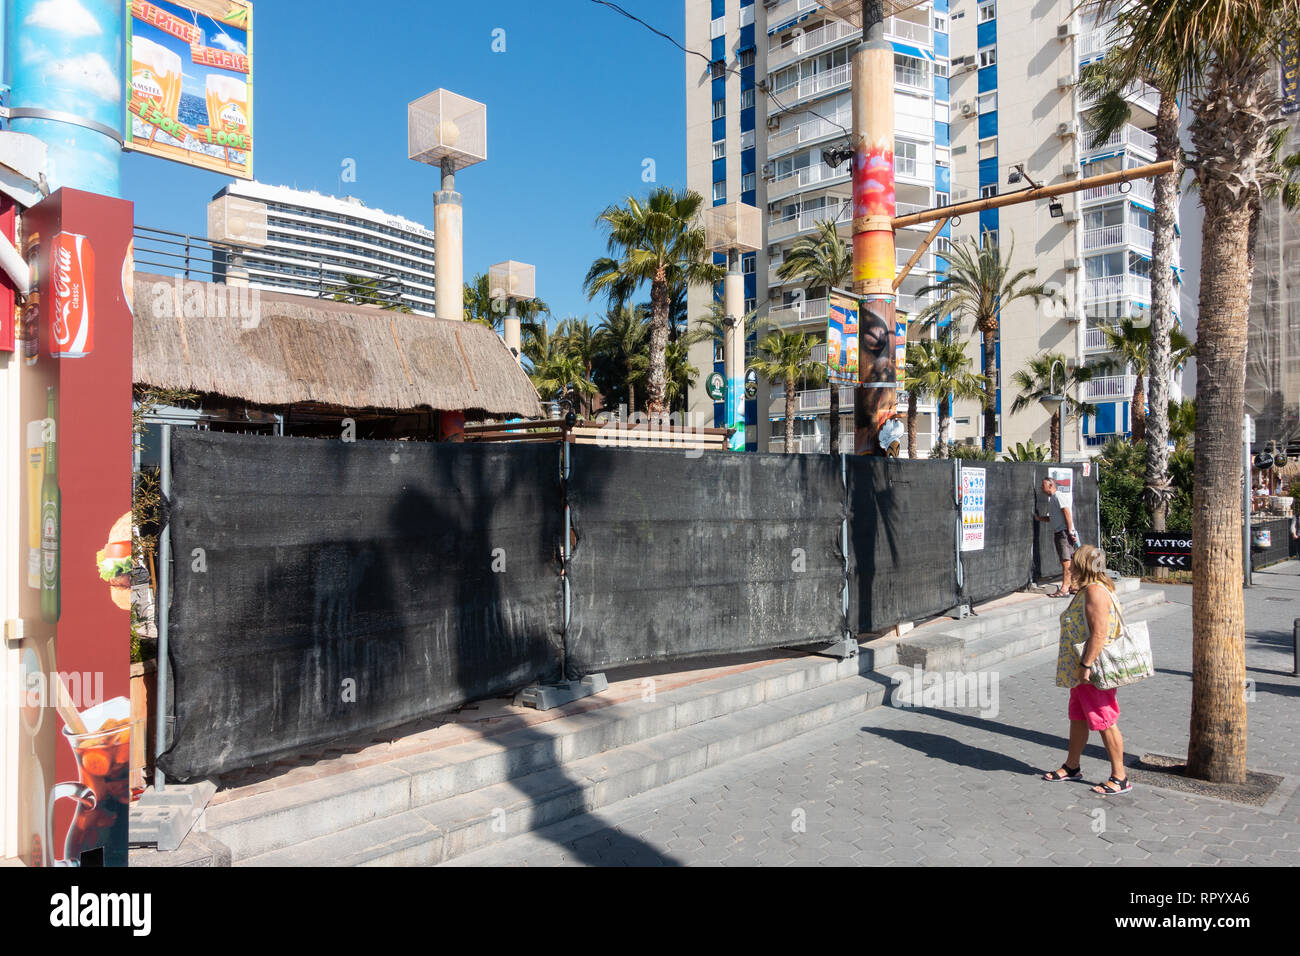 Benidorm, Costa Blanca, Spain, 23rd February 2019. The seafront Tiki Beach Bar on Levante beach, Benidorm is finally closed after much controversy and complaints from local residents. There are no reports as to wether this is a complete closure or just a refurbishment .  Credit: Mick Flynn/Alamy Live News Stock Photo